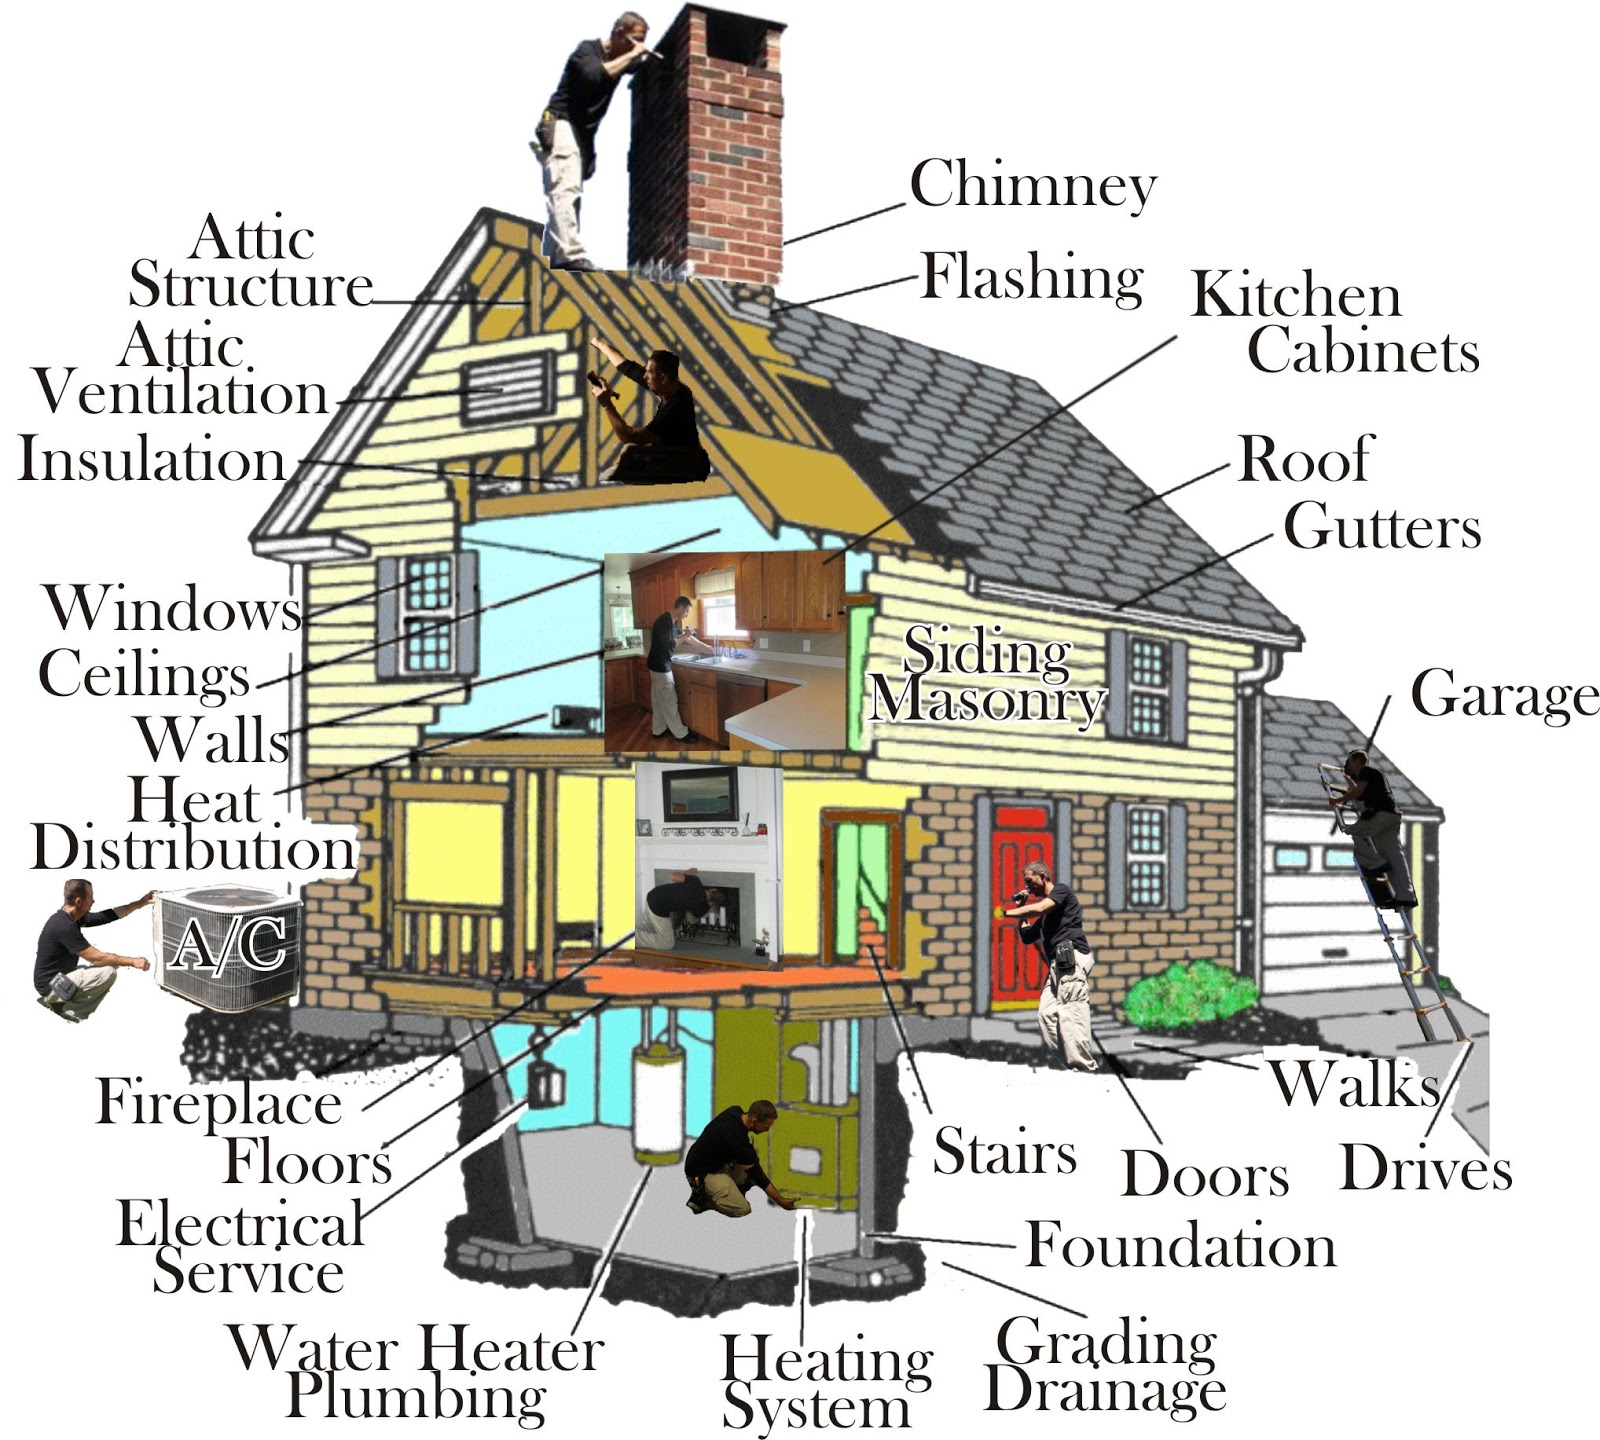 Get a Professional Home Inspections